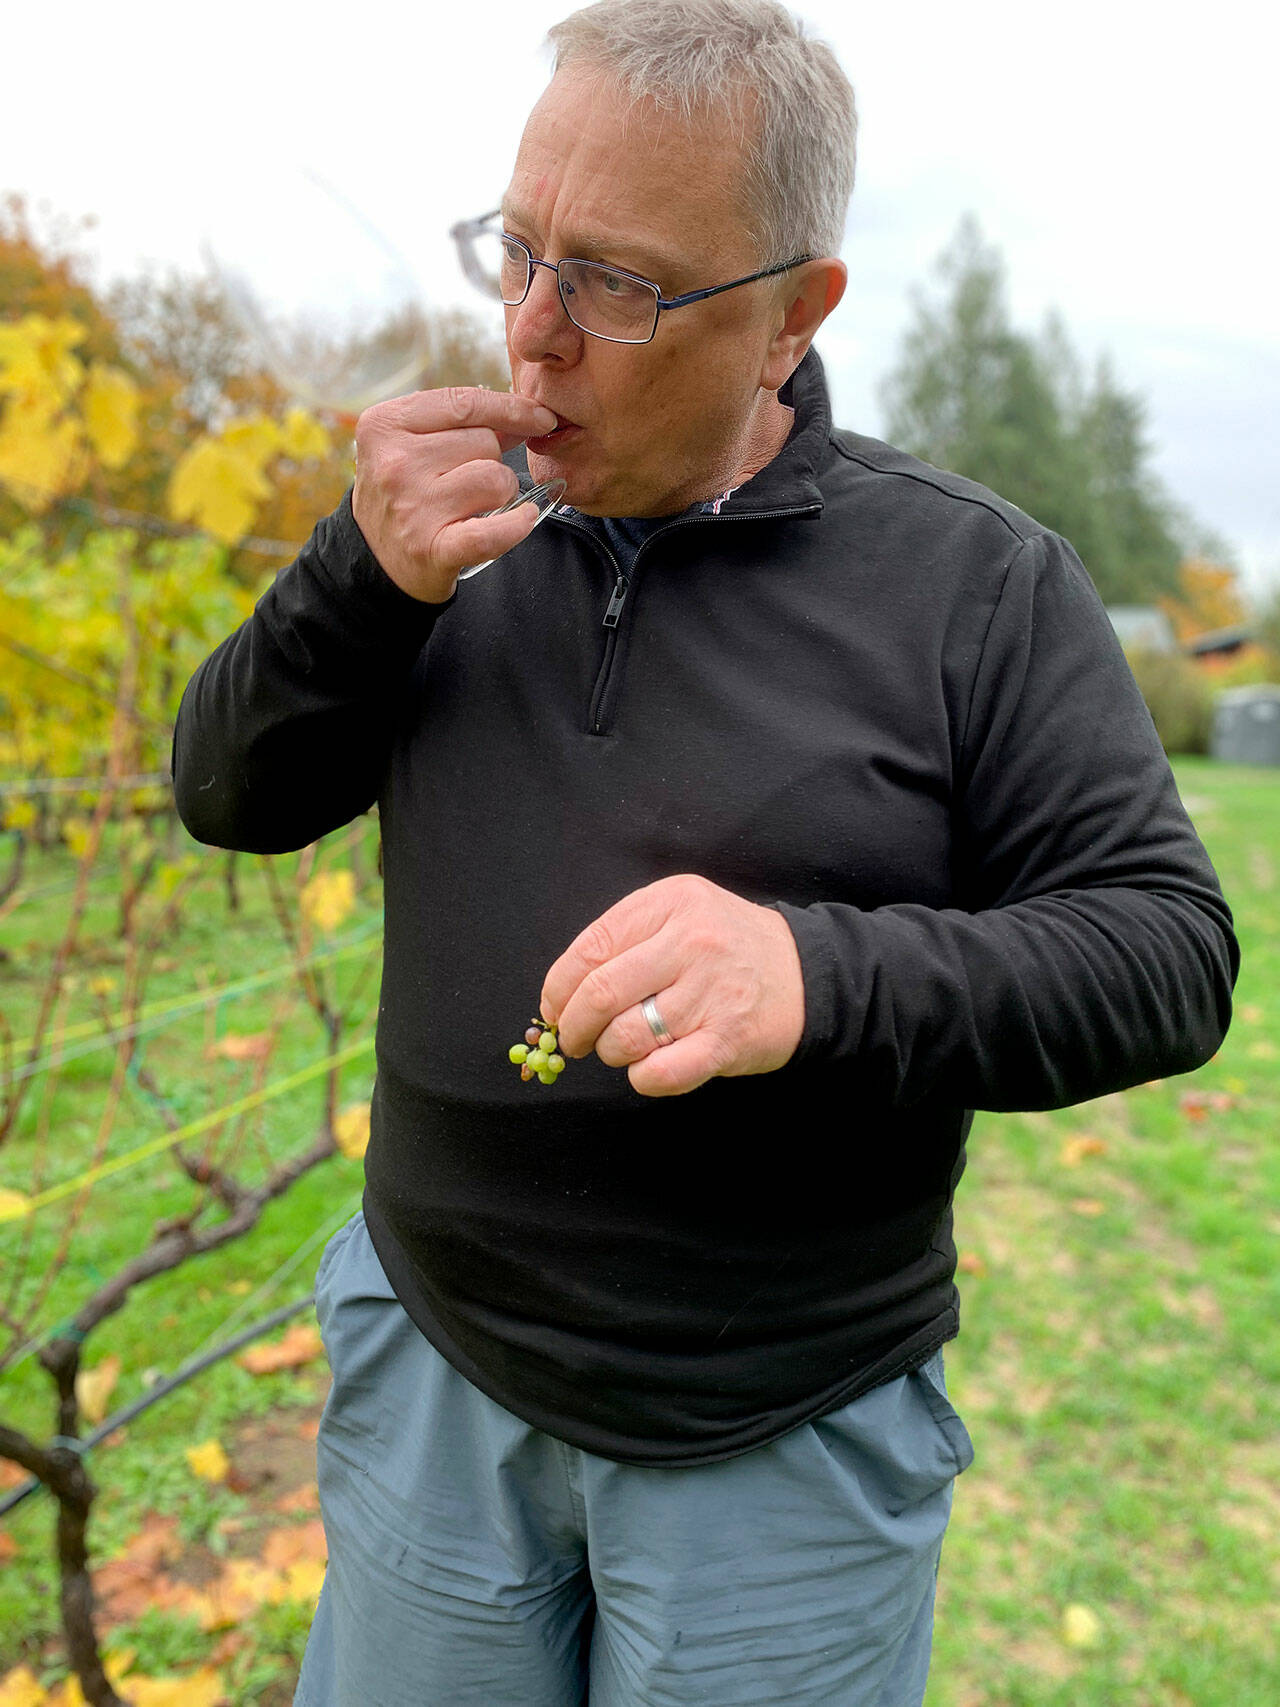 Stuart Chisholm tastes a tiny unripened grape straight from the vine — it was sour on this fall day. (Bob Smith | Kitsap Daily News)